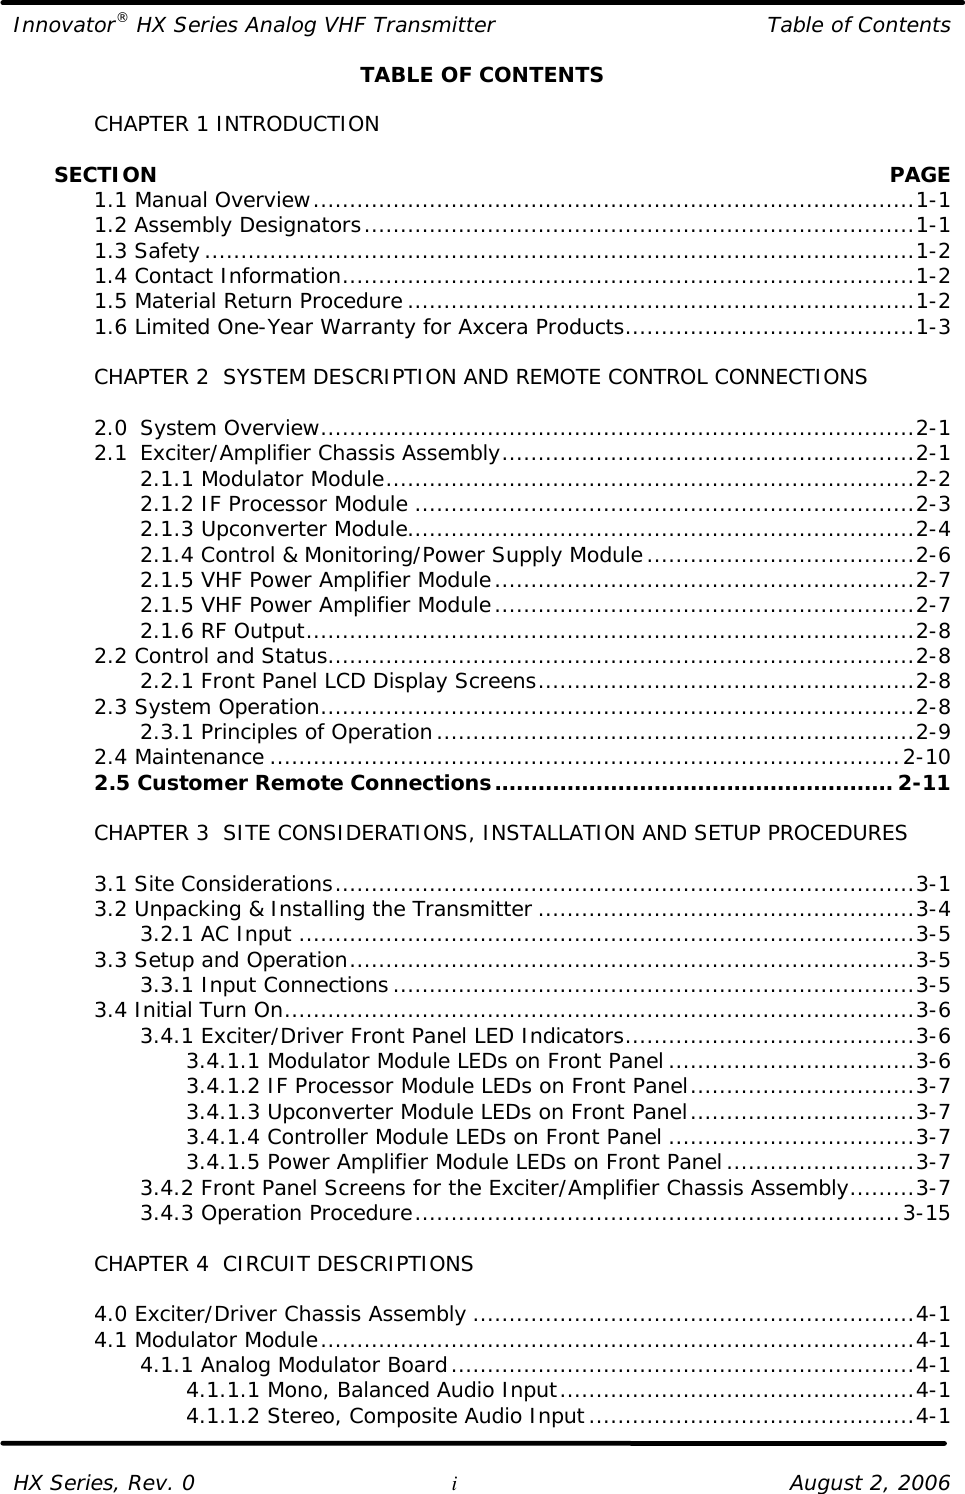 Innovator® HX Series Analog VHF Transmitter Table of Contents  HX Series, Rev. 0 i August 2, 2006 TABLE OF CONTENTS   CHAPTER 1 INTRODUCTION        SECTION    PAGE  1.1 Manual Overview...................................................................................1-1  1.2 Assembly Designators............................................................................1-1  1.3 Safety..................................................................................................1-2  1.4 Contact Information...............................................................................1-2  1.5 Material Return Procedure ......................................................................1-2  1.6 Limited One-Year Warranty for Axcera Products........................................1-3   CHAPTER 2  SYSTEM DESCRIPTION AND REMOTE CONTROL CONNECTIONS   2.0 System Overview..................................................................................2-1  2.1 Exciter/Amplifier Chassis Assembly.........................................................2-1     2.1.1 Modulator Module.........................................................................2-2     2.1.2 IF Processor Module .....................................................................2-3     2.1.3 Upconverter Module......................................................................2-4     2.1.4 Control &amp; Monitoring/Power Supply Module.....................................2-6     2.1.5 VHF Power Amplifier Module..........................................................2-7     2.1.5 VHF Power Amplifier Module..........................................................2-7     2.1.6 RF Output....................................................................................2-8  2.2 Control and Status.................................................................................2-8     2.2.1 Front Panel LCD Display Screens....................................................2-8  2.3 System Operation..................................................................................2-8     2.3.1 Principles of Operation..................................................................2-9  2.4 Maintenance .......................................................................................2-10  2.5 Customer Remote Connections....................................................... 2-11   CHAPTER 3  SITE CONSIDERATIONS, INSTALLATION AND SETUP PROCEDURES     3.1 Site Considerations................................................................................3-1  3.2 Unpacking &amp; Installing the Transmitter ....................................................3-4     3.2.1 AC Input .....................................................................................3-5  3.3 Setup and Operation..............................................................................3-5     3.3.1 Input Connections........................................................................3-5  3.4 Initial Turn On.......................................................................................3-6     3.4.1 Exciter/Driver Front Panel LED Indicators........................................3-6     3.4.1.1 Modulator Module LEDs on Front Panel ..................................3-6     3.4.1.2 IF Processor Module LEDs on Front Panel...............................3-7     3.4.1.3 Upconverter Module LEDs on Front Panel...............................3-7     3.4.1.4 Controller Module LEDs on Front Panel ..................................3-7     3.4.1.5 Power Amplifier Module LEDs on Front Panel..........................3-7     3.4.2 Front Panel Screens for the Exciter/Amplifier Chassis Assembly.........3-7     3.4.3 Operation Procedure...................................................................3-15   CHAPTER 4  CIRCUIT DESCRIPTIONS   4.0 Exciter/Driver Chassis Assembly .............................................................4-1  4.1 Modulator Module..................................................................................4-1     4.1.1 Analog Modulator Board................................................................4-1     4.1.1.1 Mono, Balanced Audio Input.................................................4-1     4.1.1.2 Stereo, Composite Audio Input.............................................4-1  